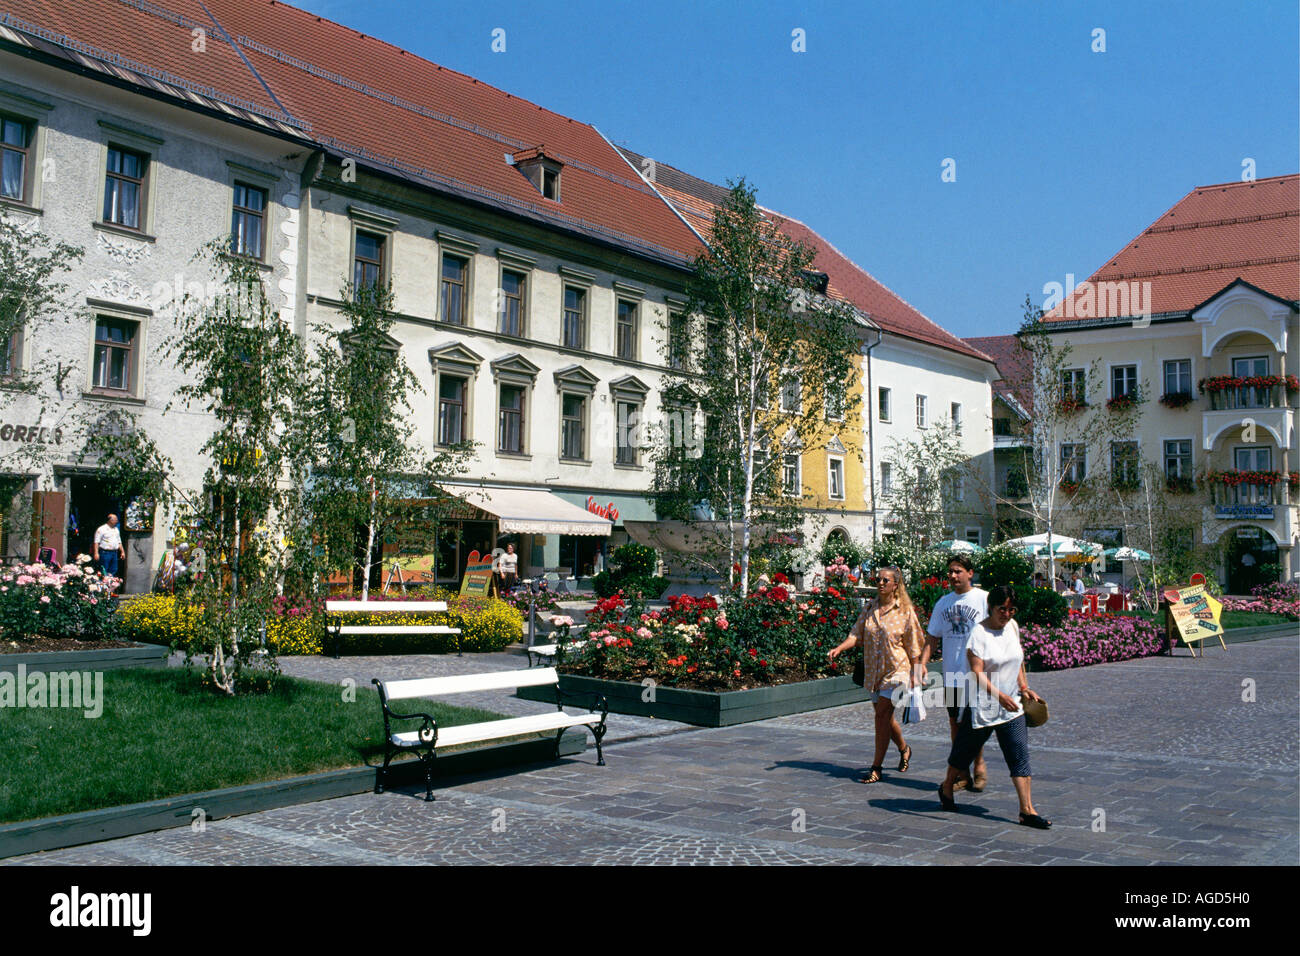 People beside the flowerbeds in the Hauptplatz of the old town of St Veit an der Glan former capital of Carinthia Stock Photo